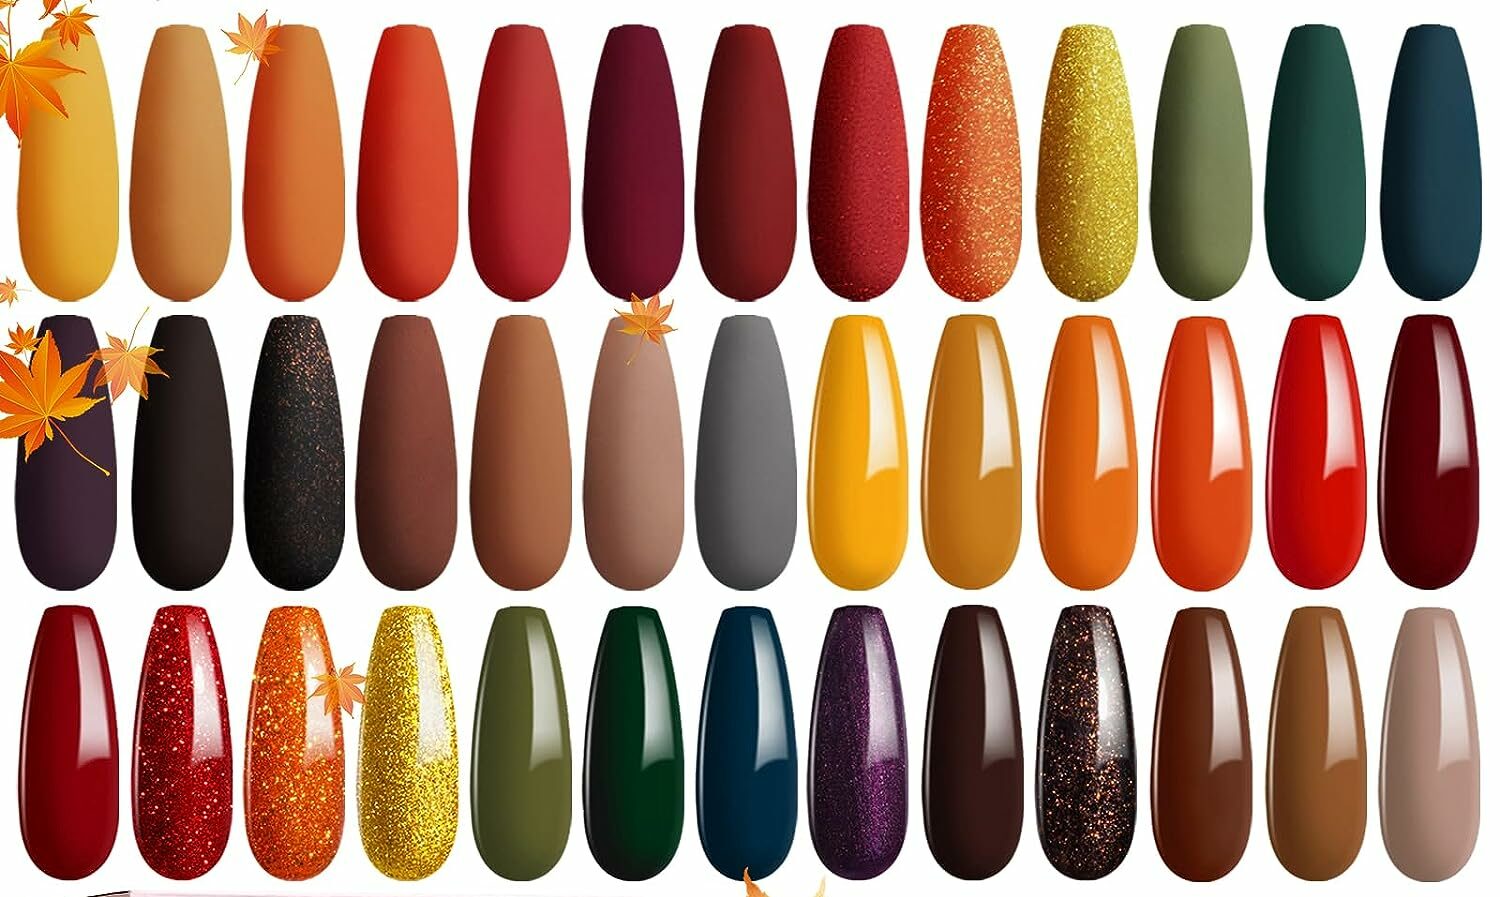 5. "Must-Have Nail Colors for Fall 2021" - wide 1